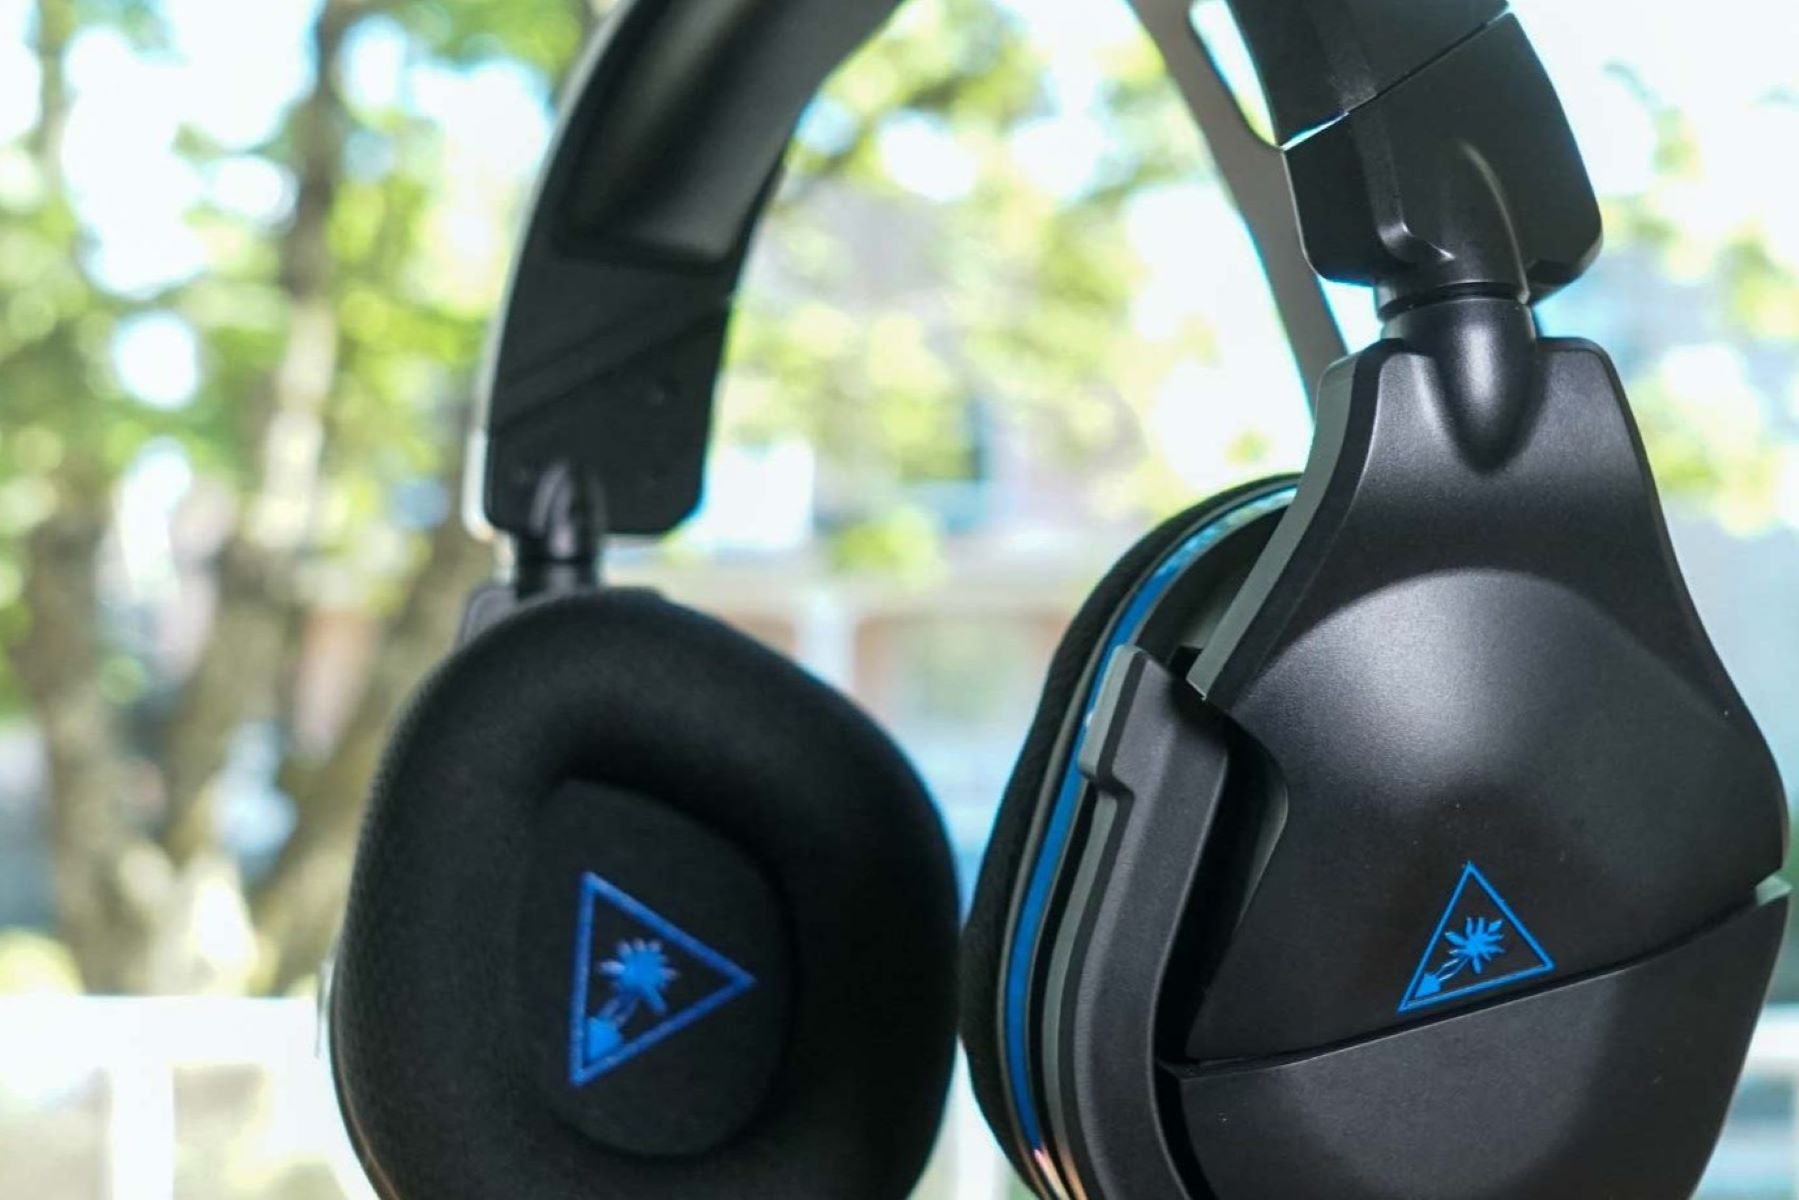 Step-by-Step Guide To Connect Turtle Beach Headset To PC